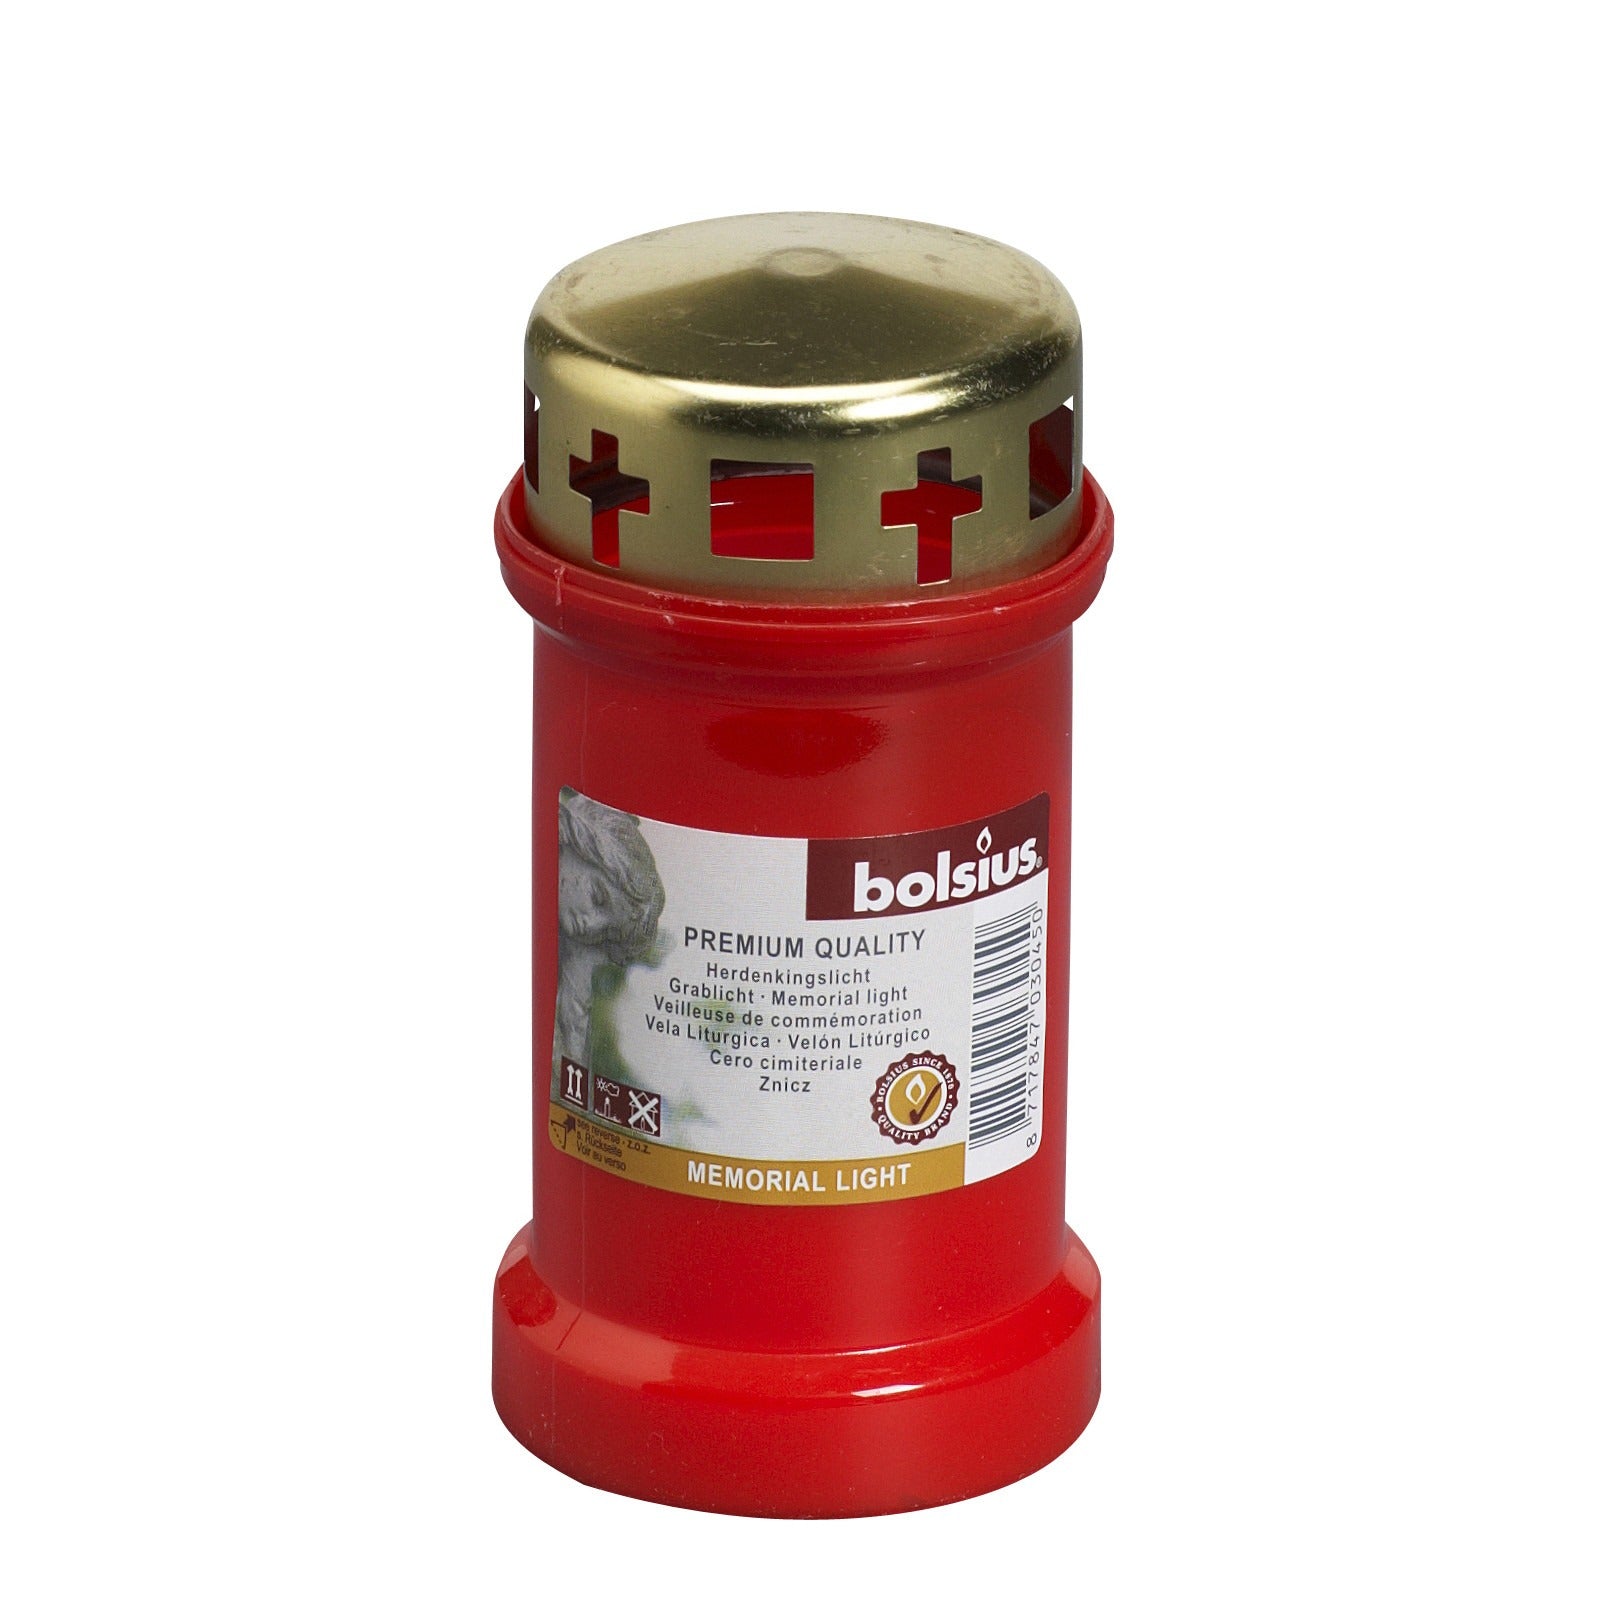 View Bolsius Memorial Light with Lid Red BT 50 hours information